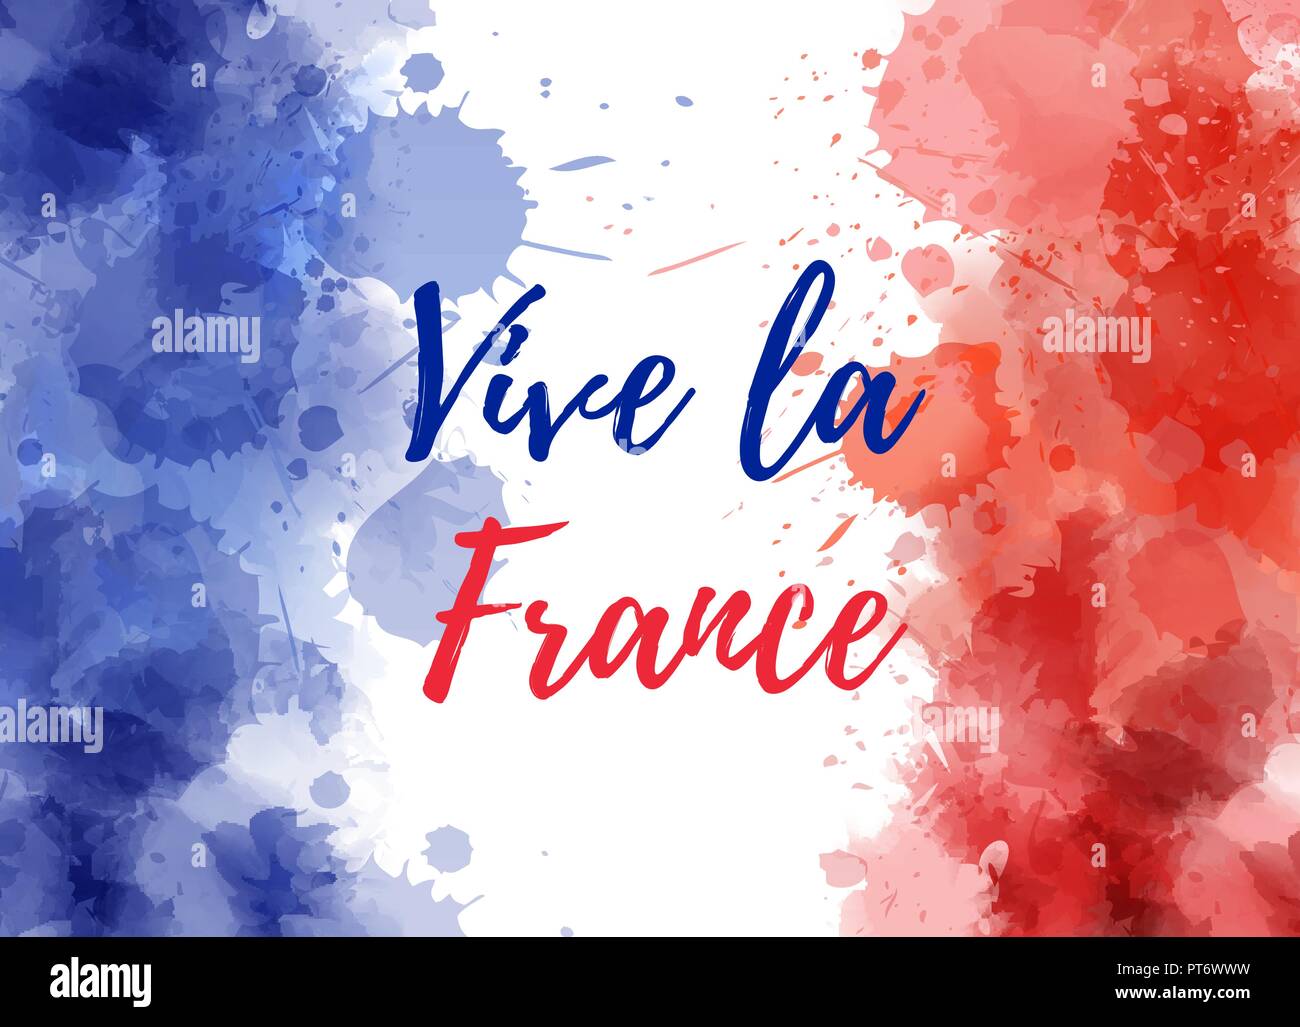 Vive la France background with waterccolored grunge design ...